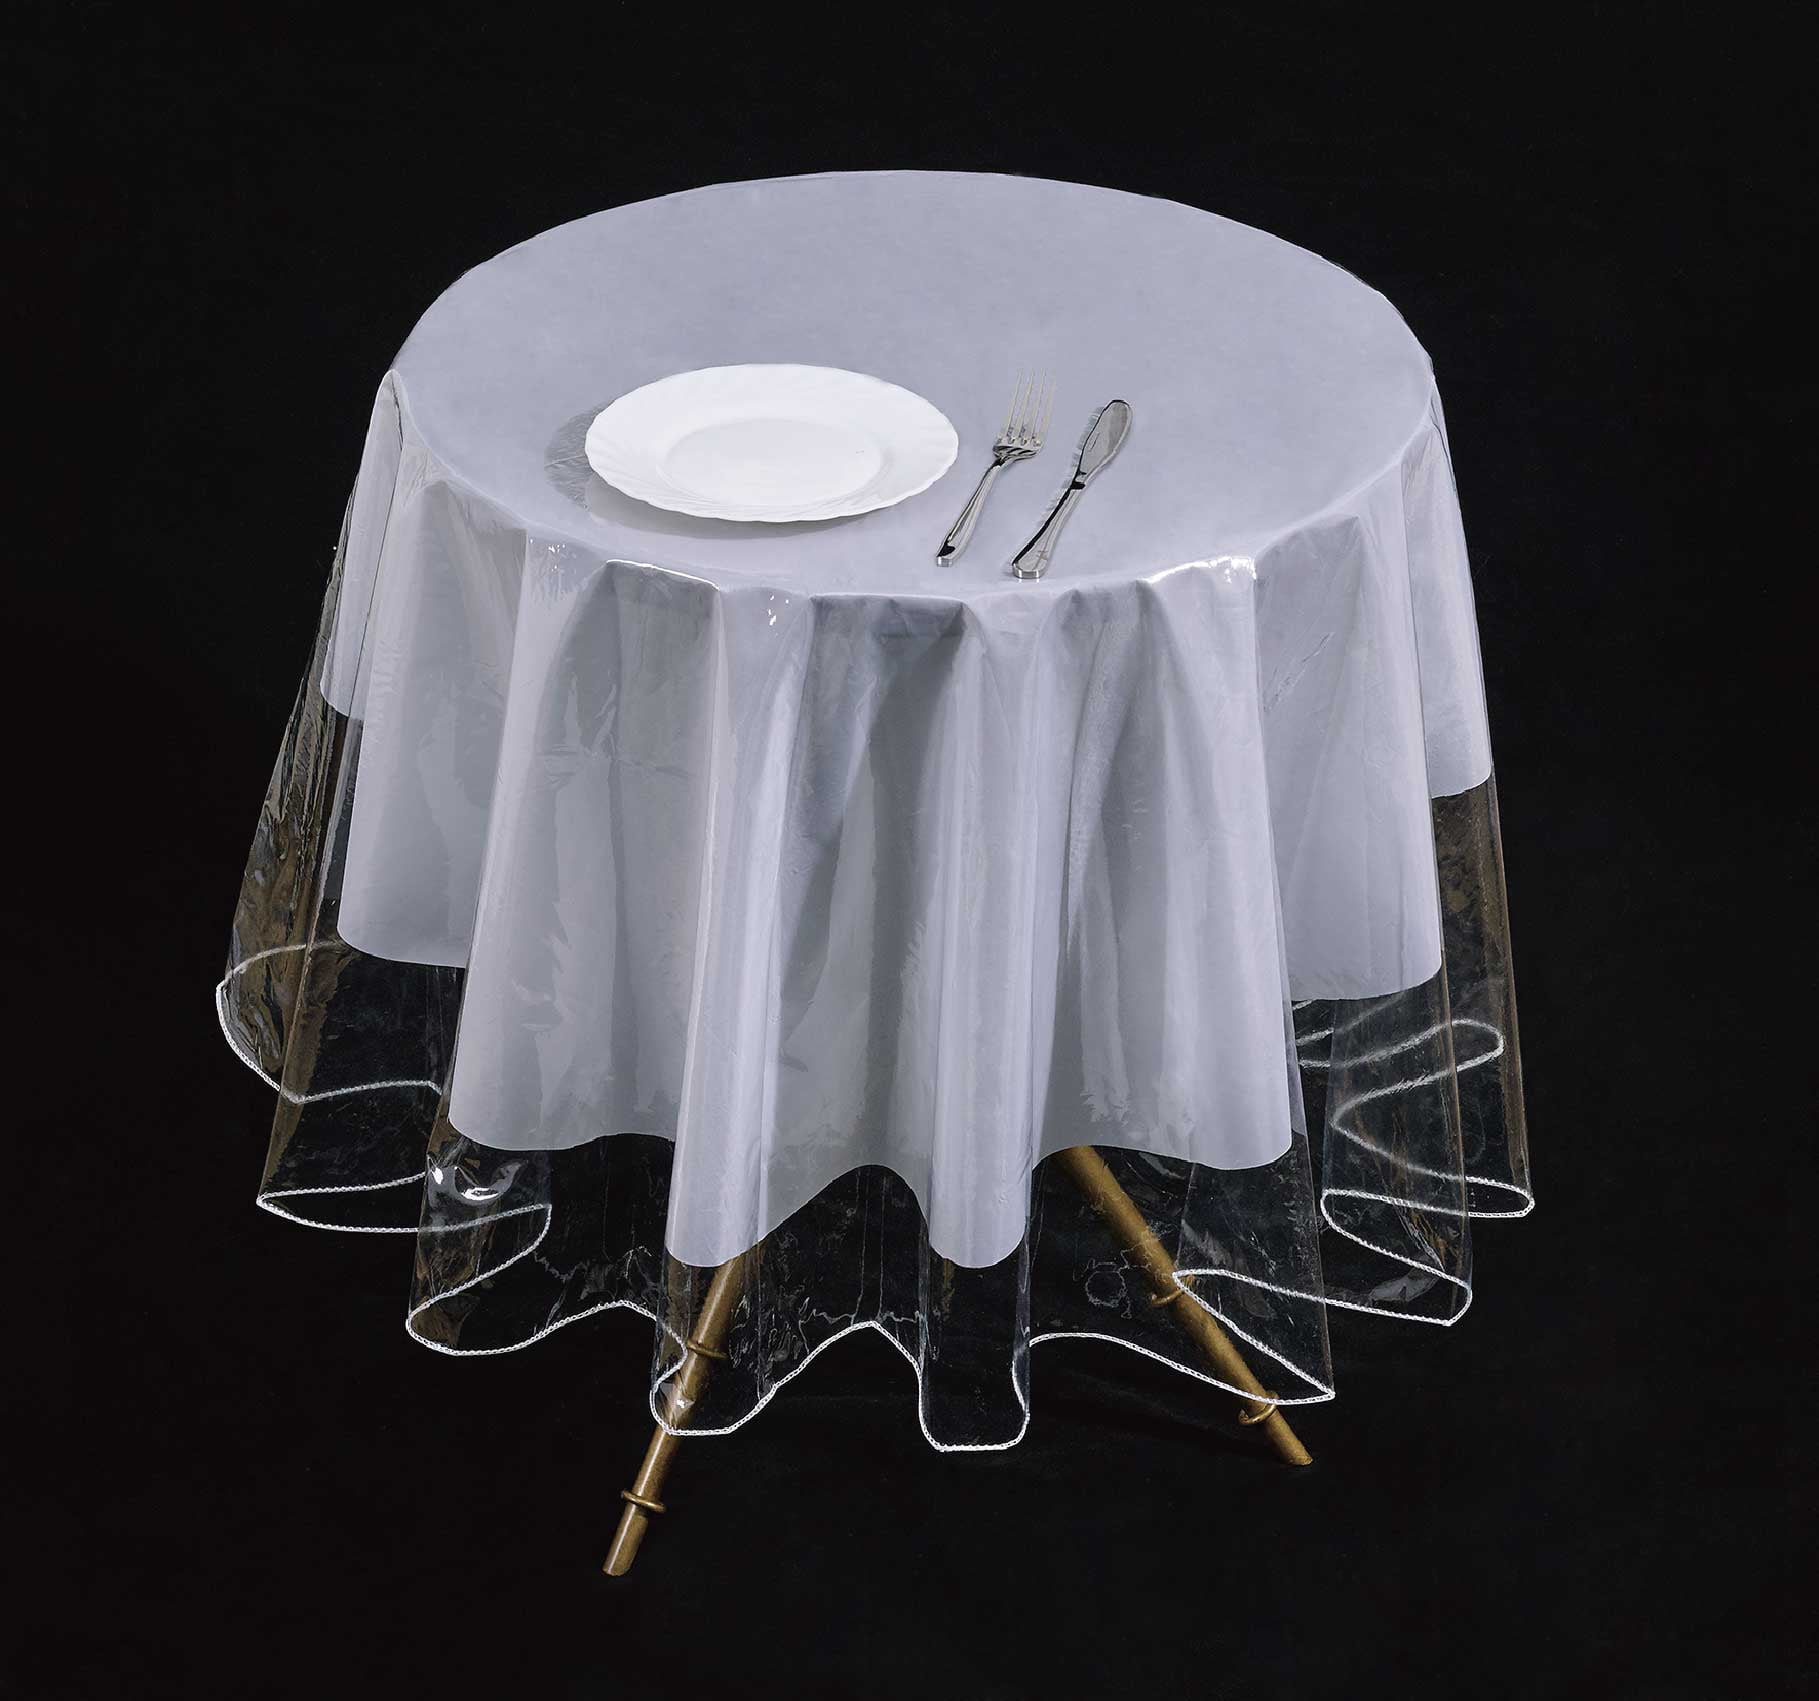 700 All For You Pvc Round Clear, Vinyl Tablecloths For 60 Inch Round Tables